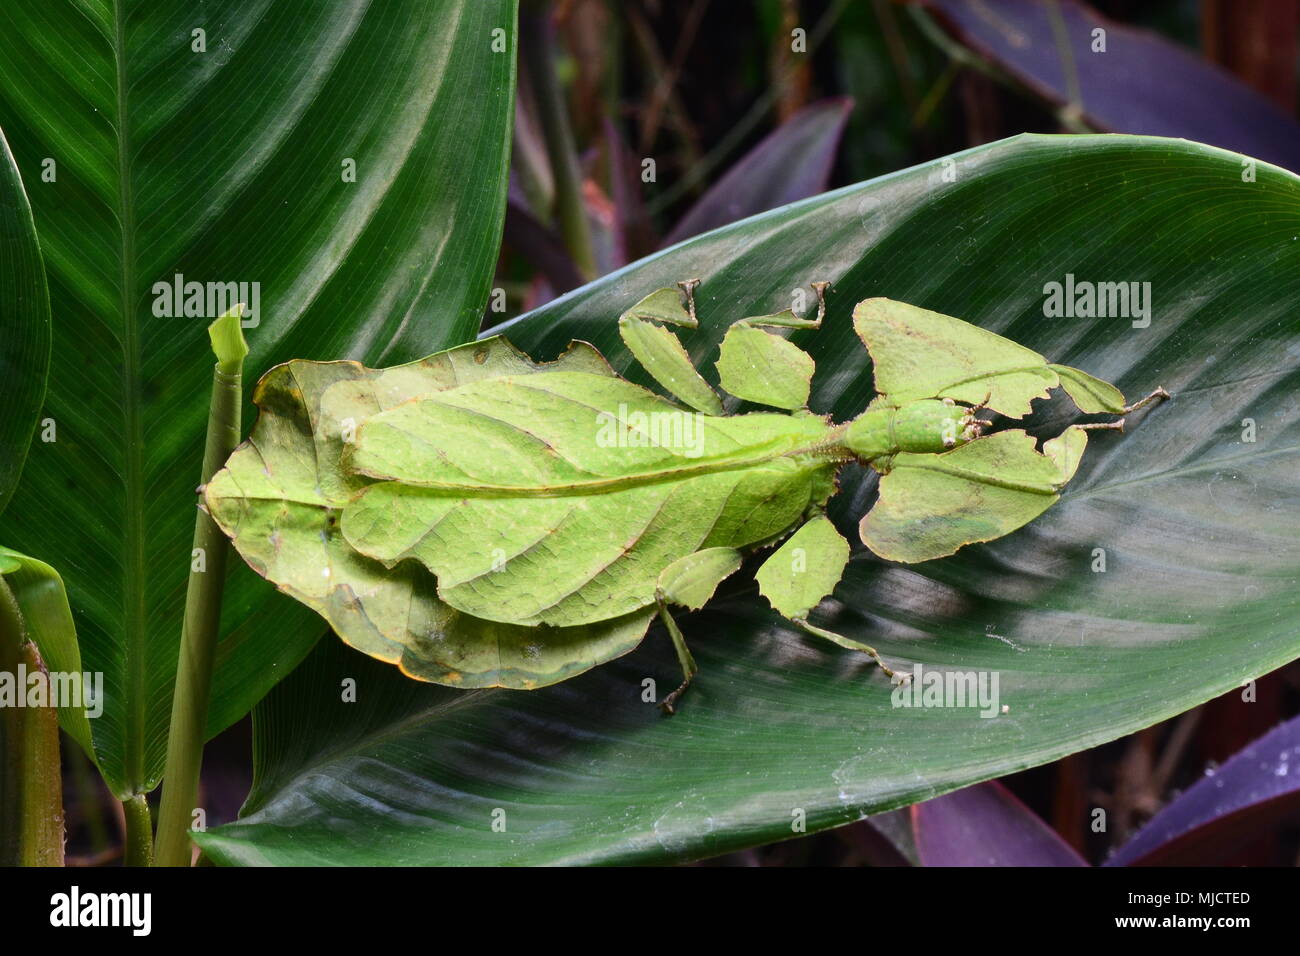 Giant leaf insect sits on a plant leaf in the gardens. Stock Photo